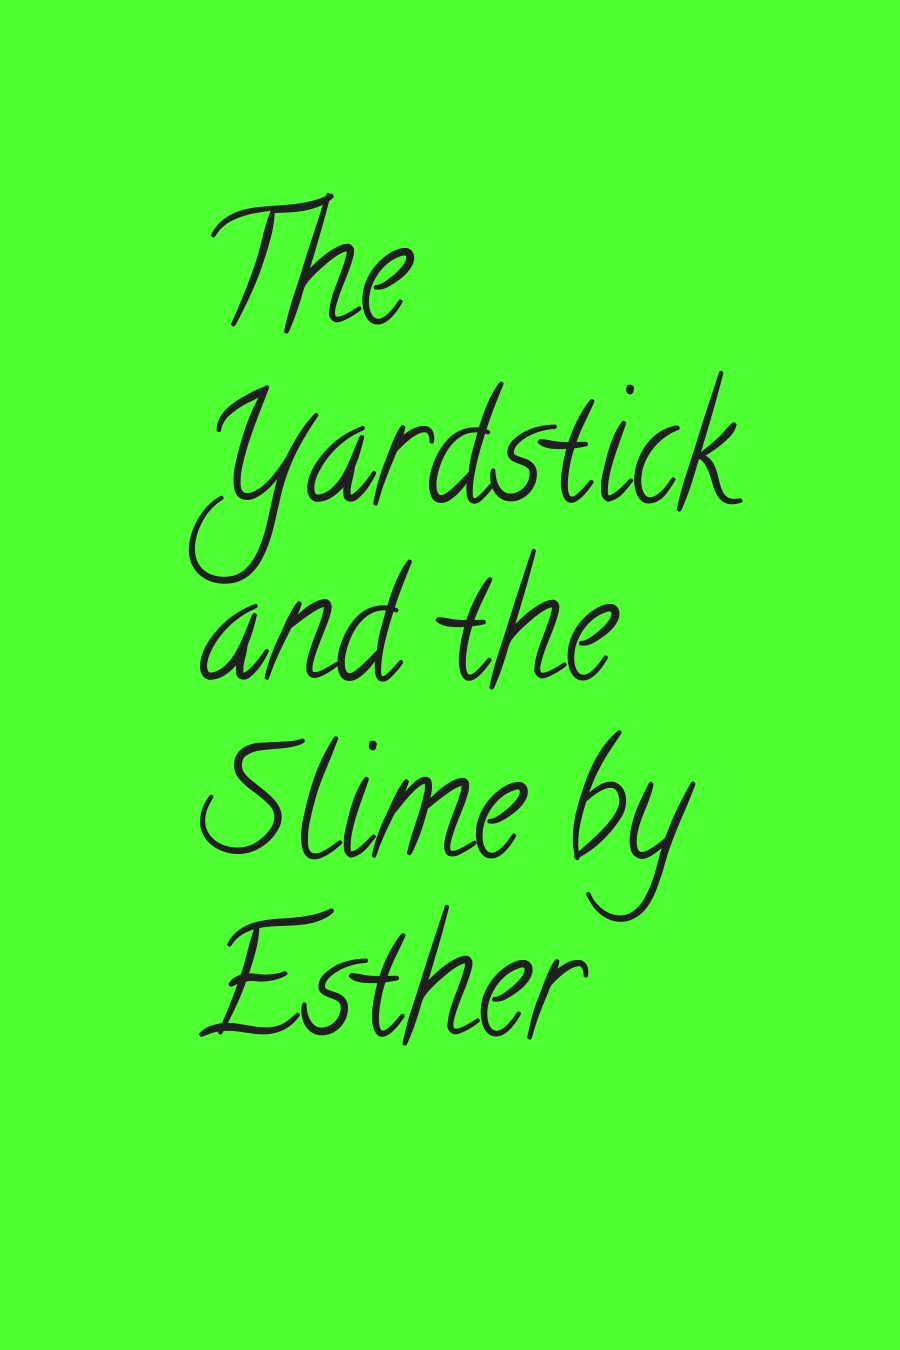 The Yardstick and the Slime by Esther L